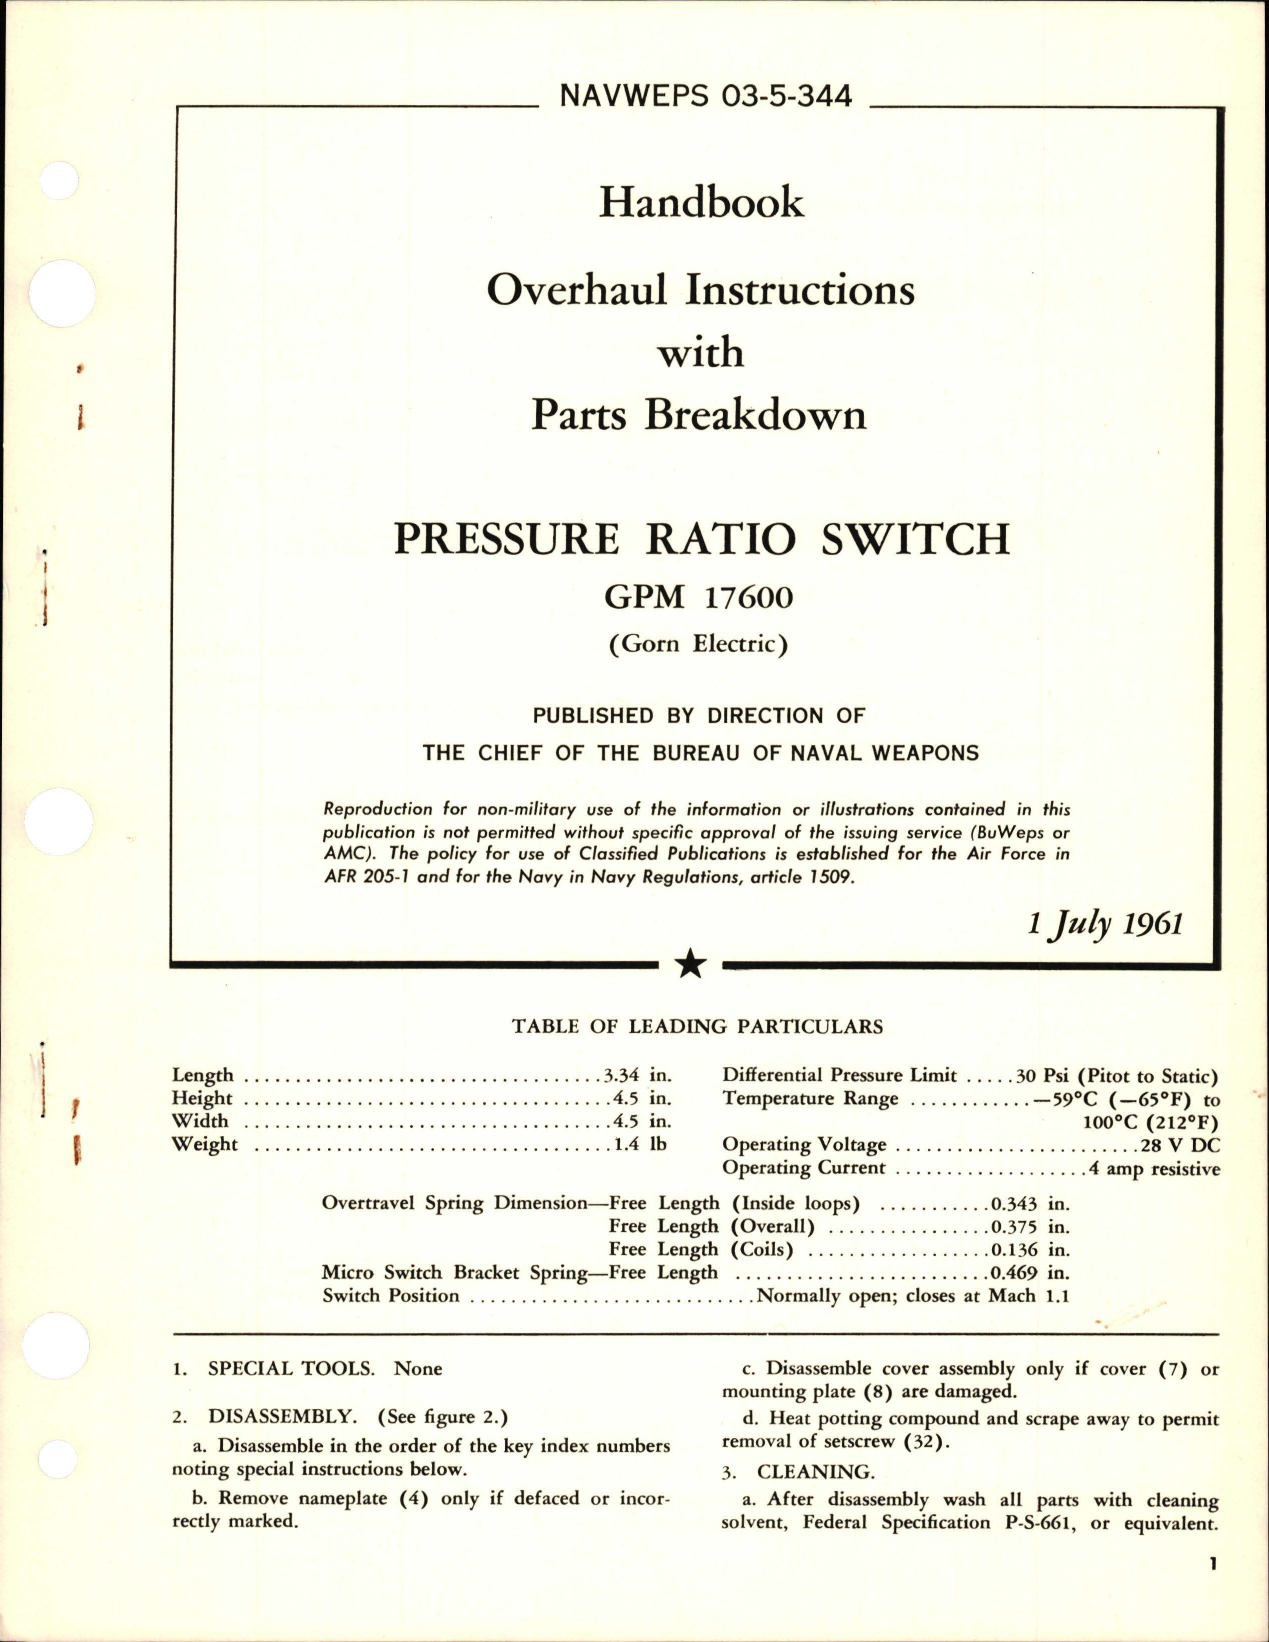 Sample page 1 from AirCorps Library document: Overhaul Instructions with Parts Breakdown for Pressure Ratio Switch - GPM 17600 